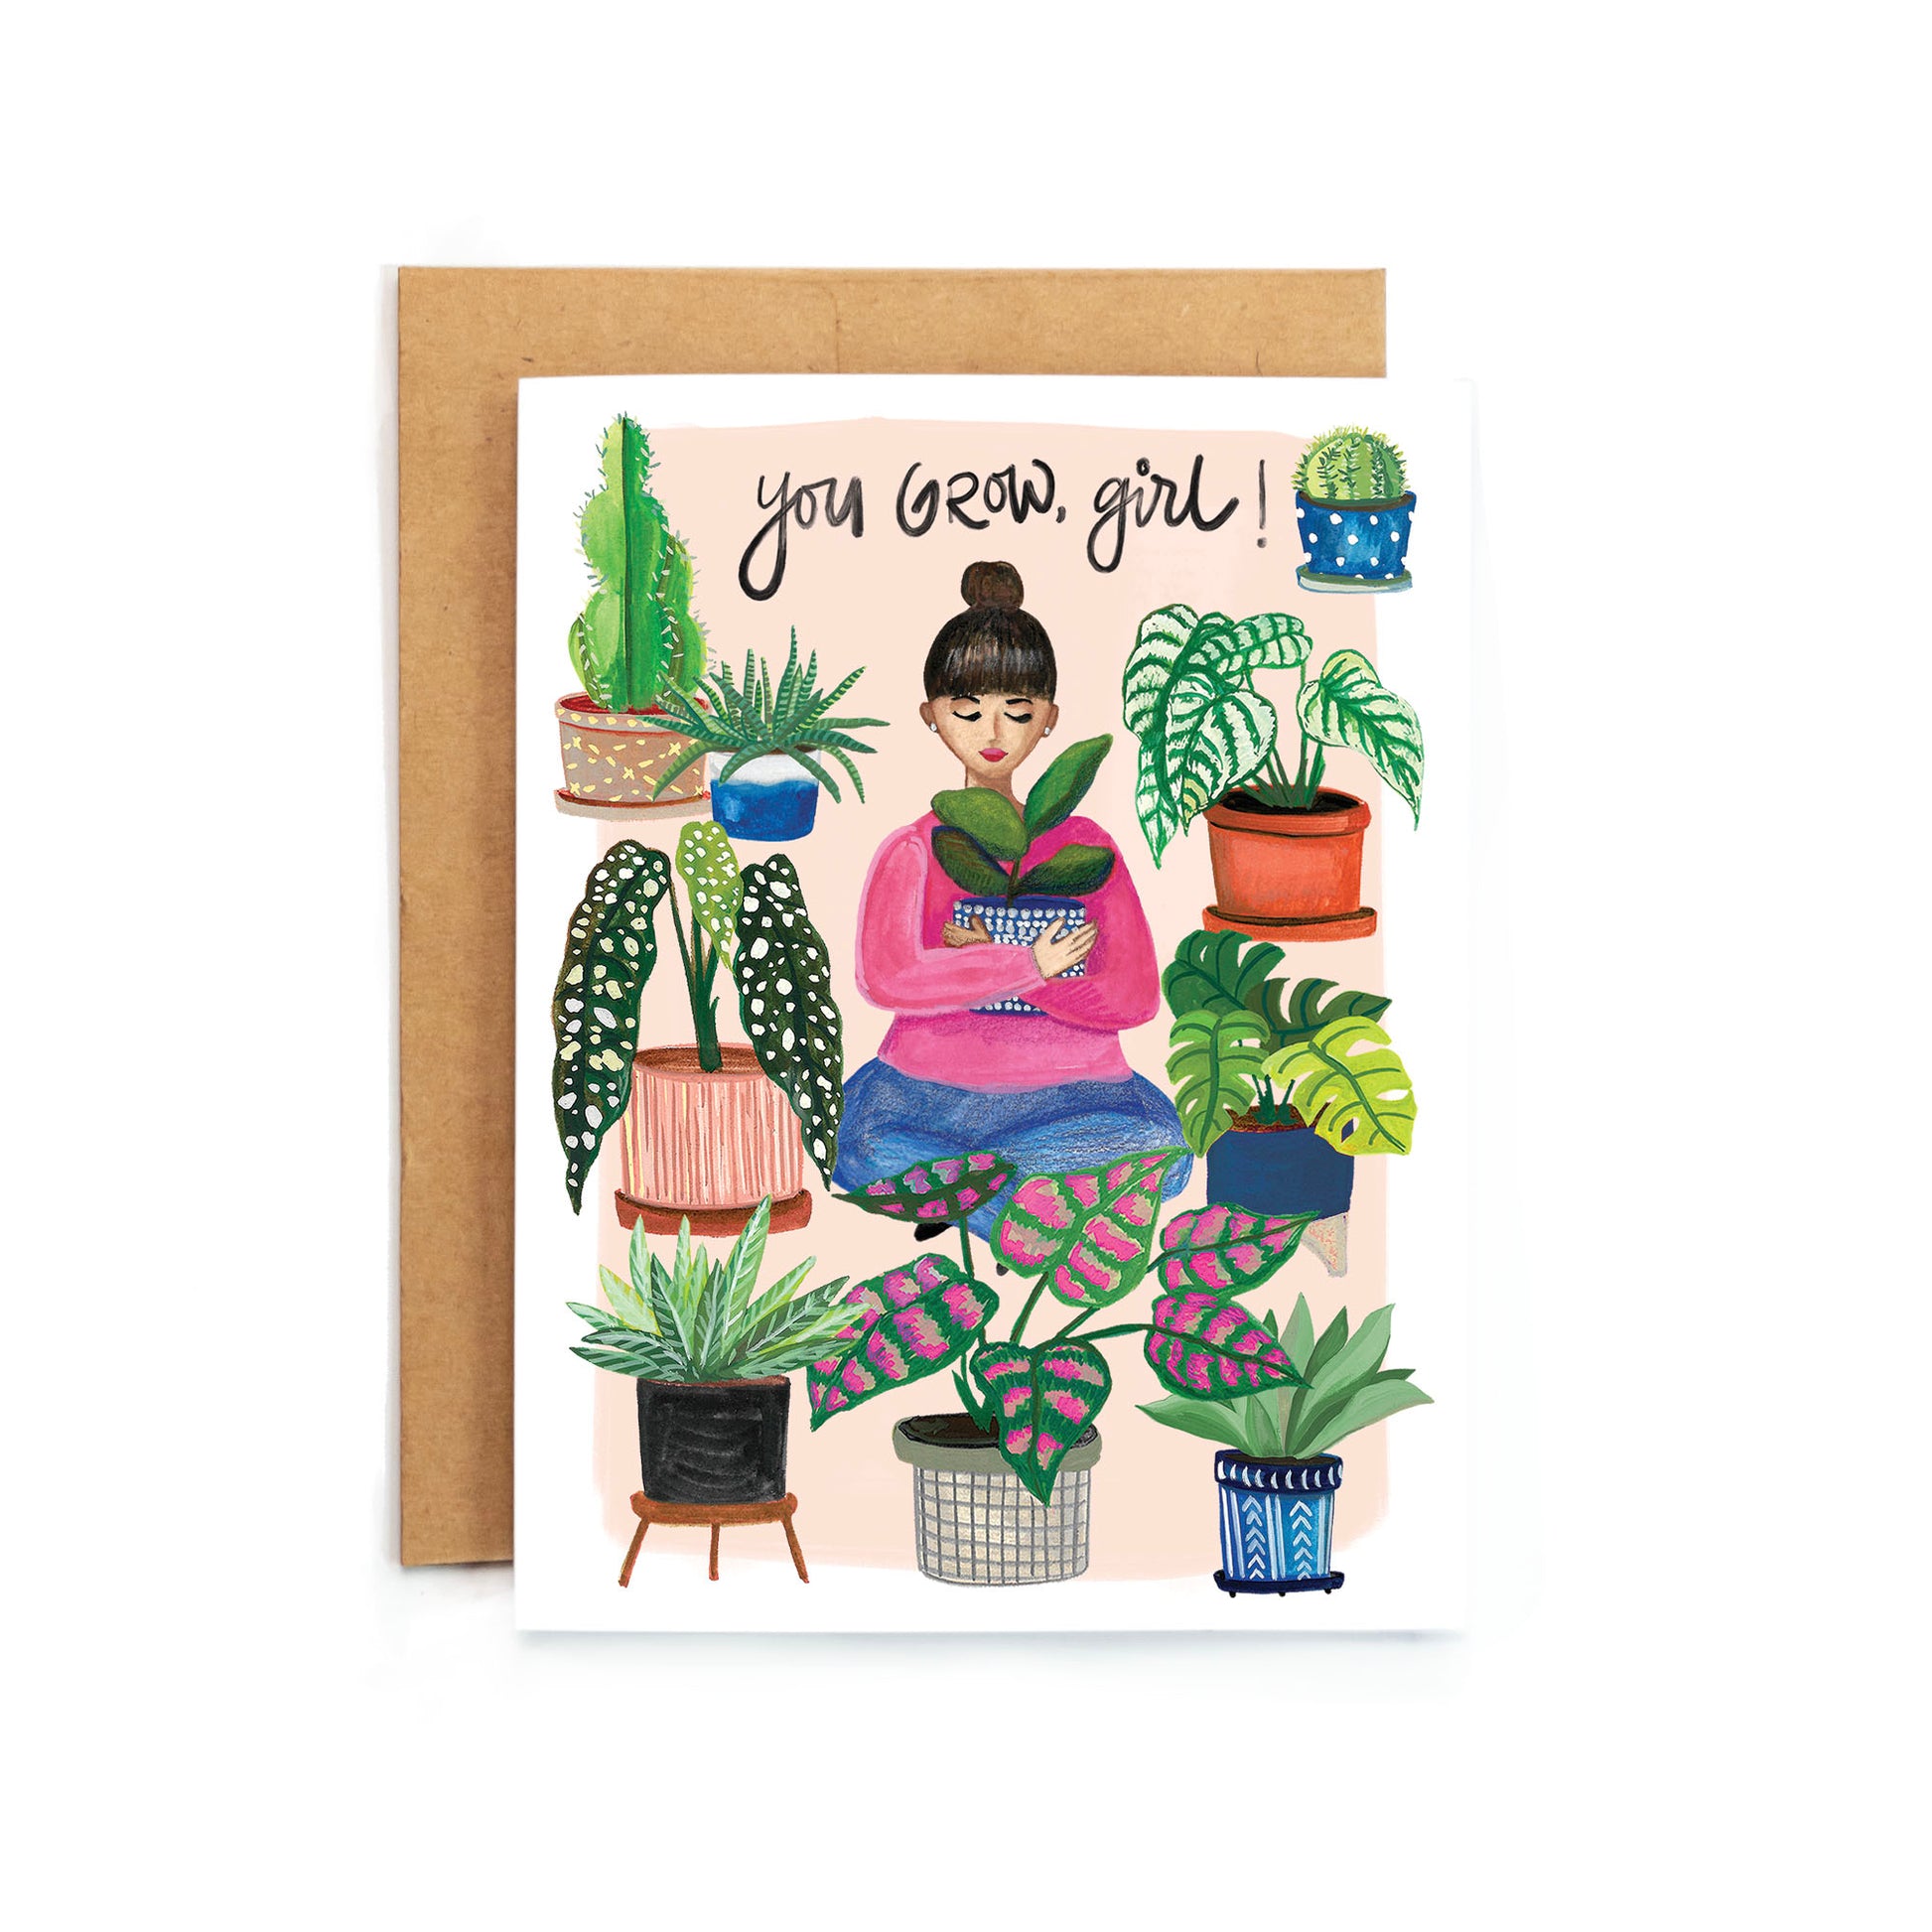 a card with a woman holding a potted plant